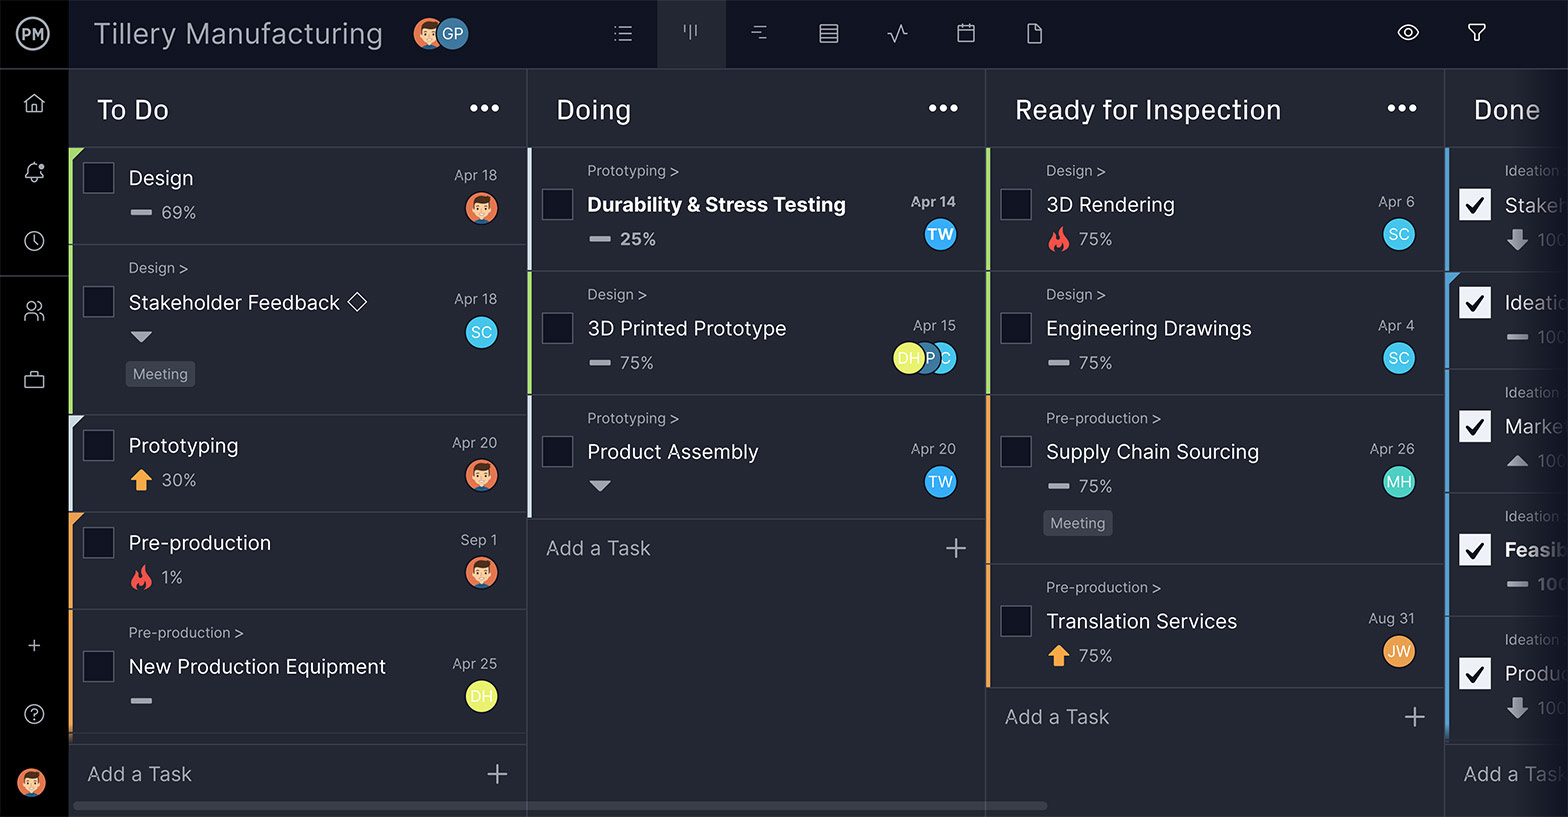 ProjectManager's kanban board is ideal for workflow management and automating recurring tasks